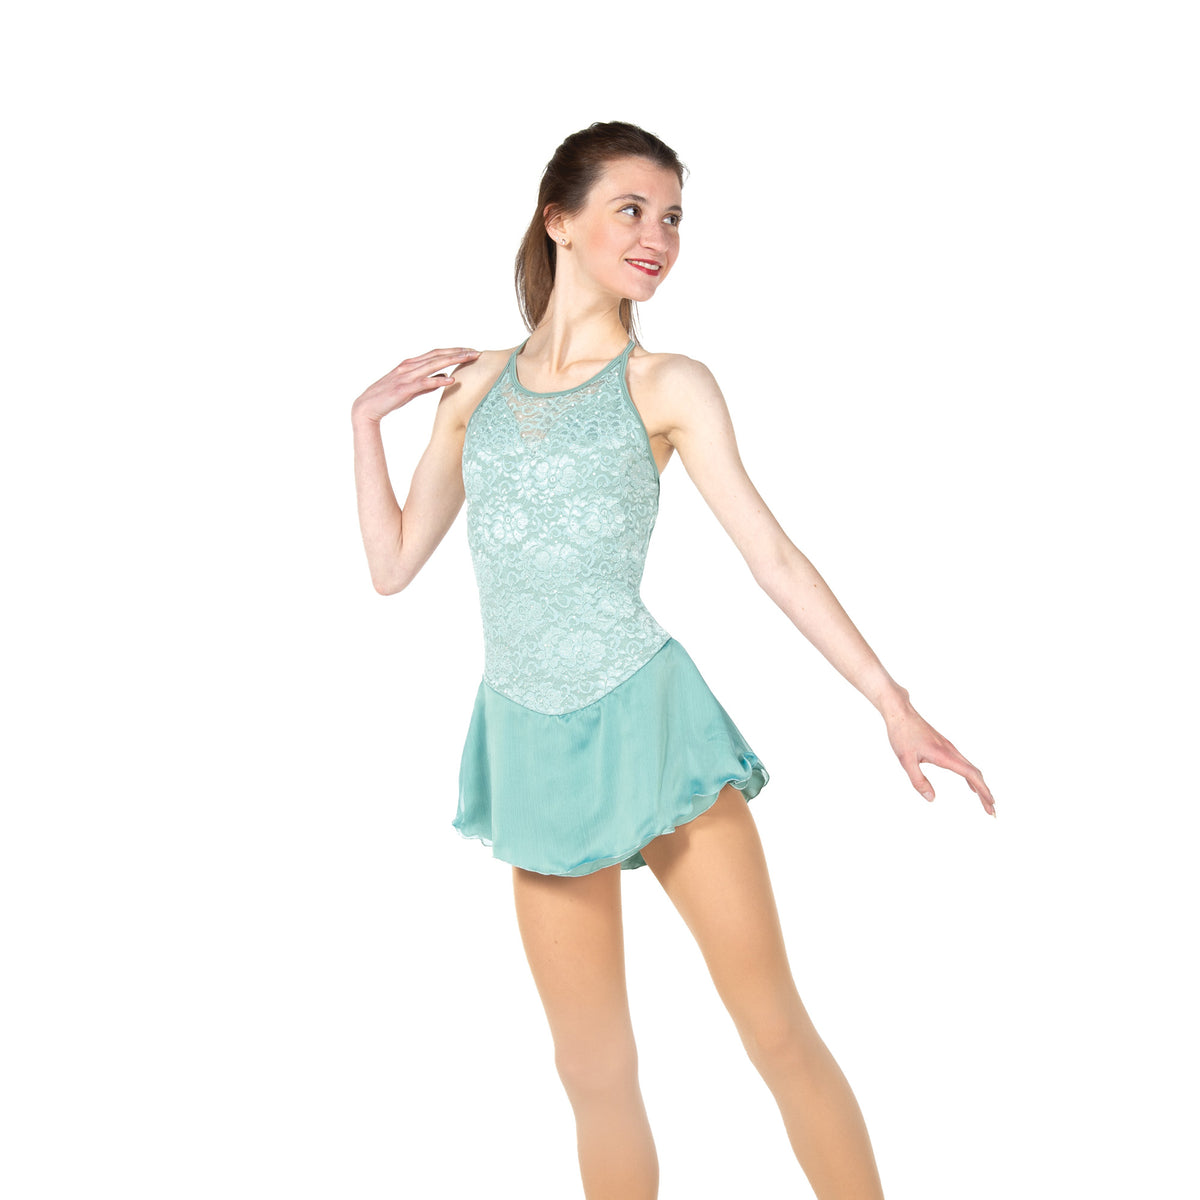 22 Competition Figure Skating Tripoly Dress – Boutique Step Up